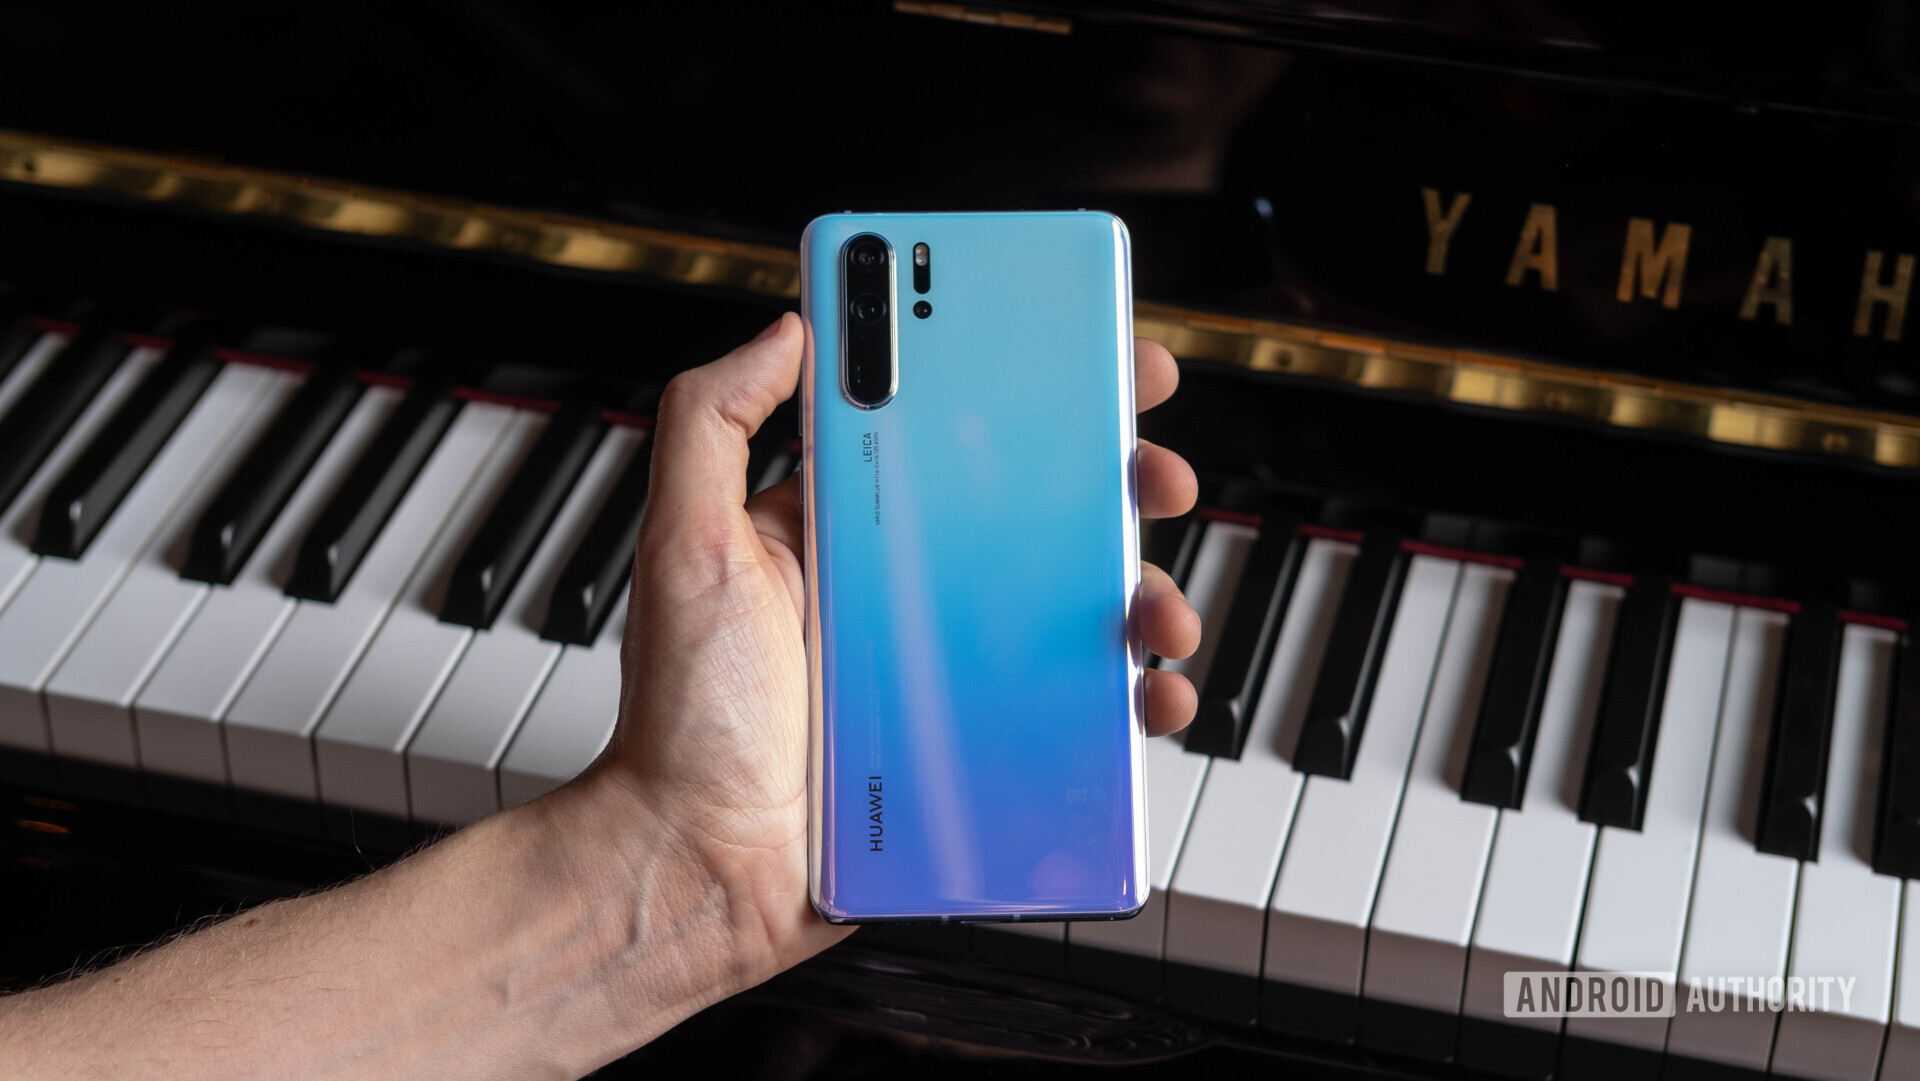 Back side of a blue Huawei P30 Pro held in hand.